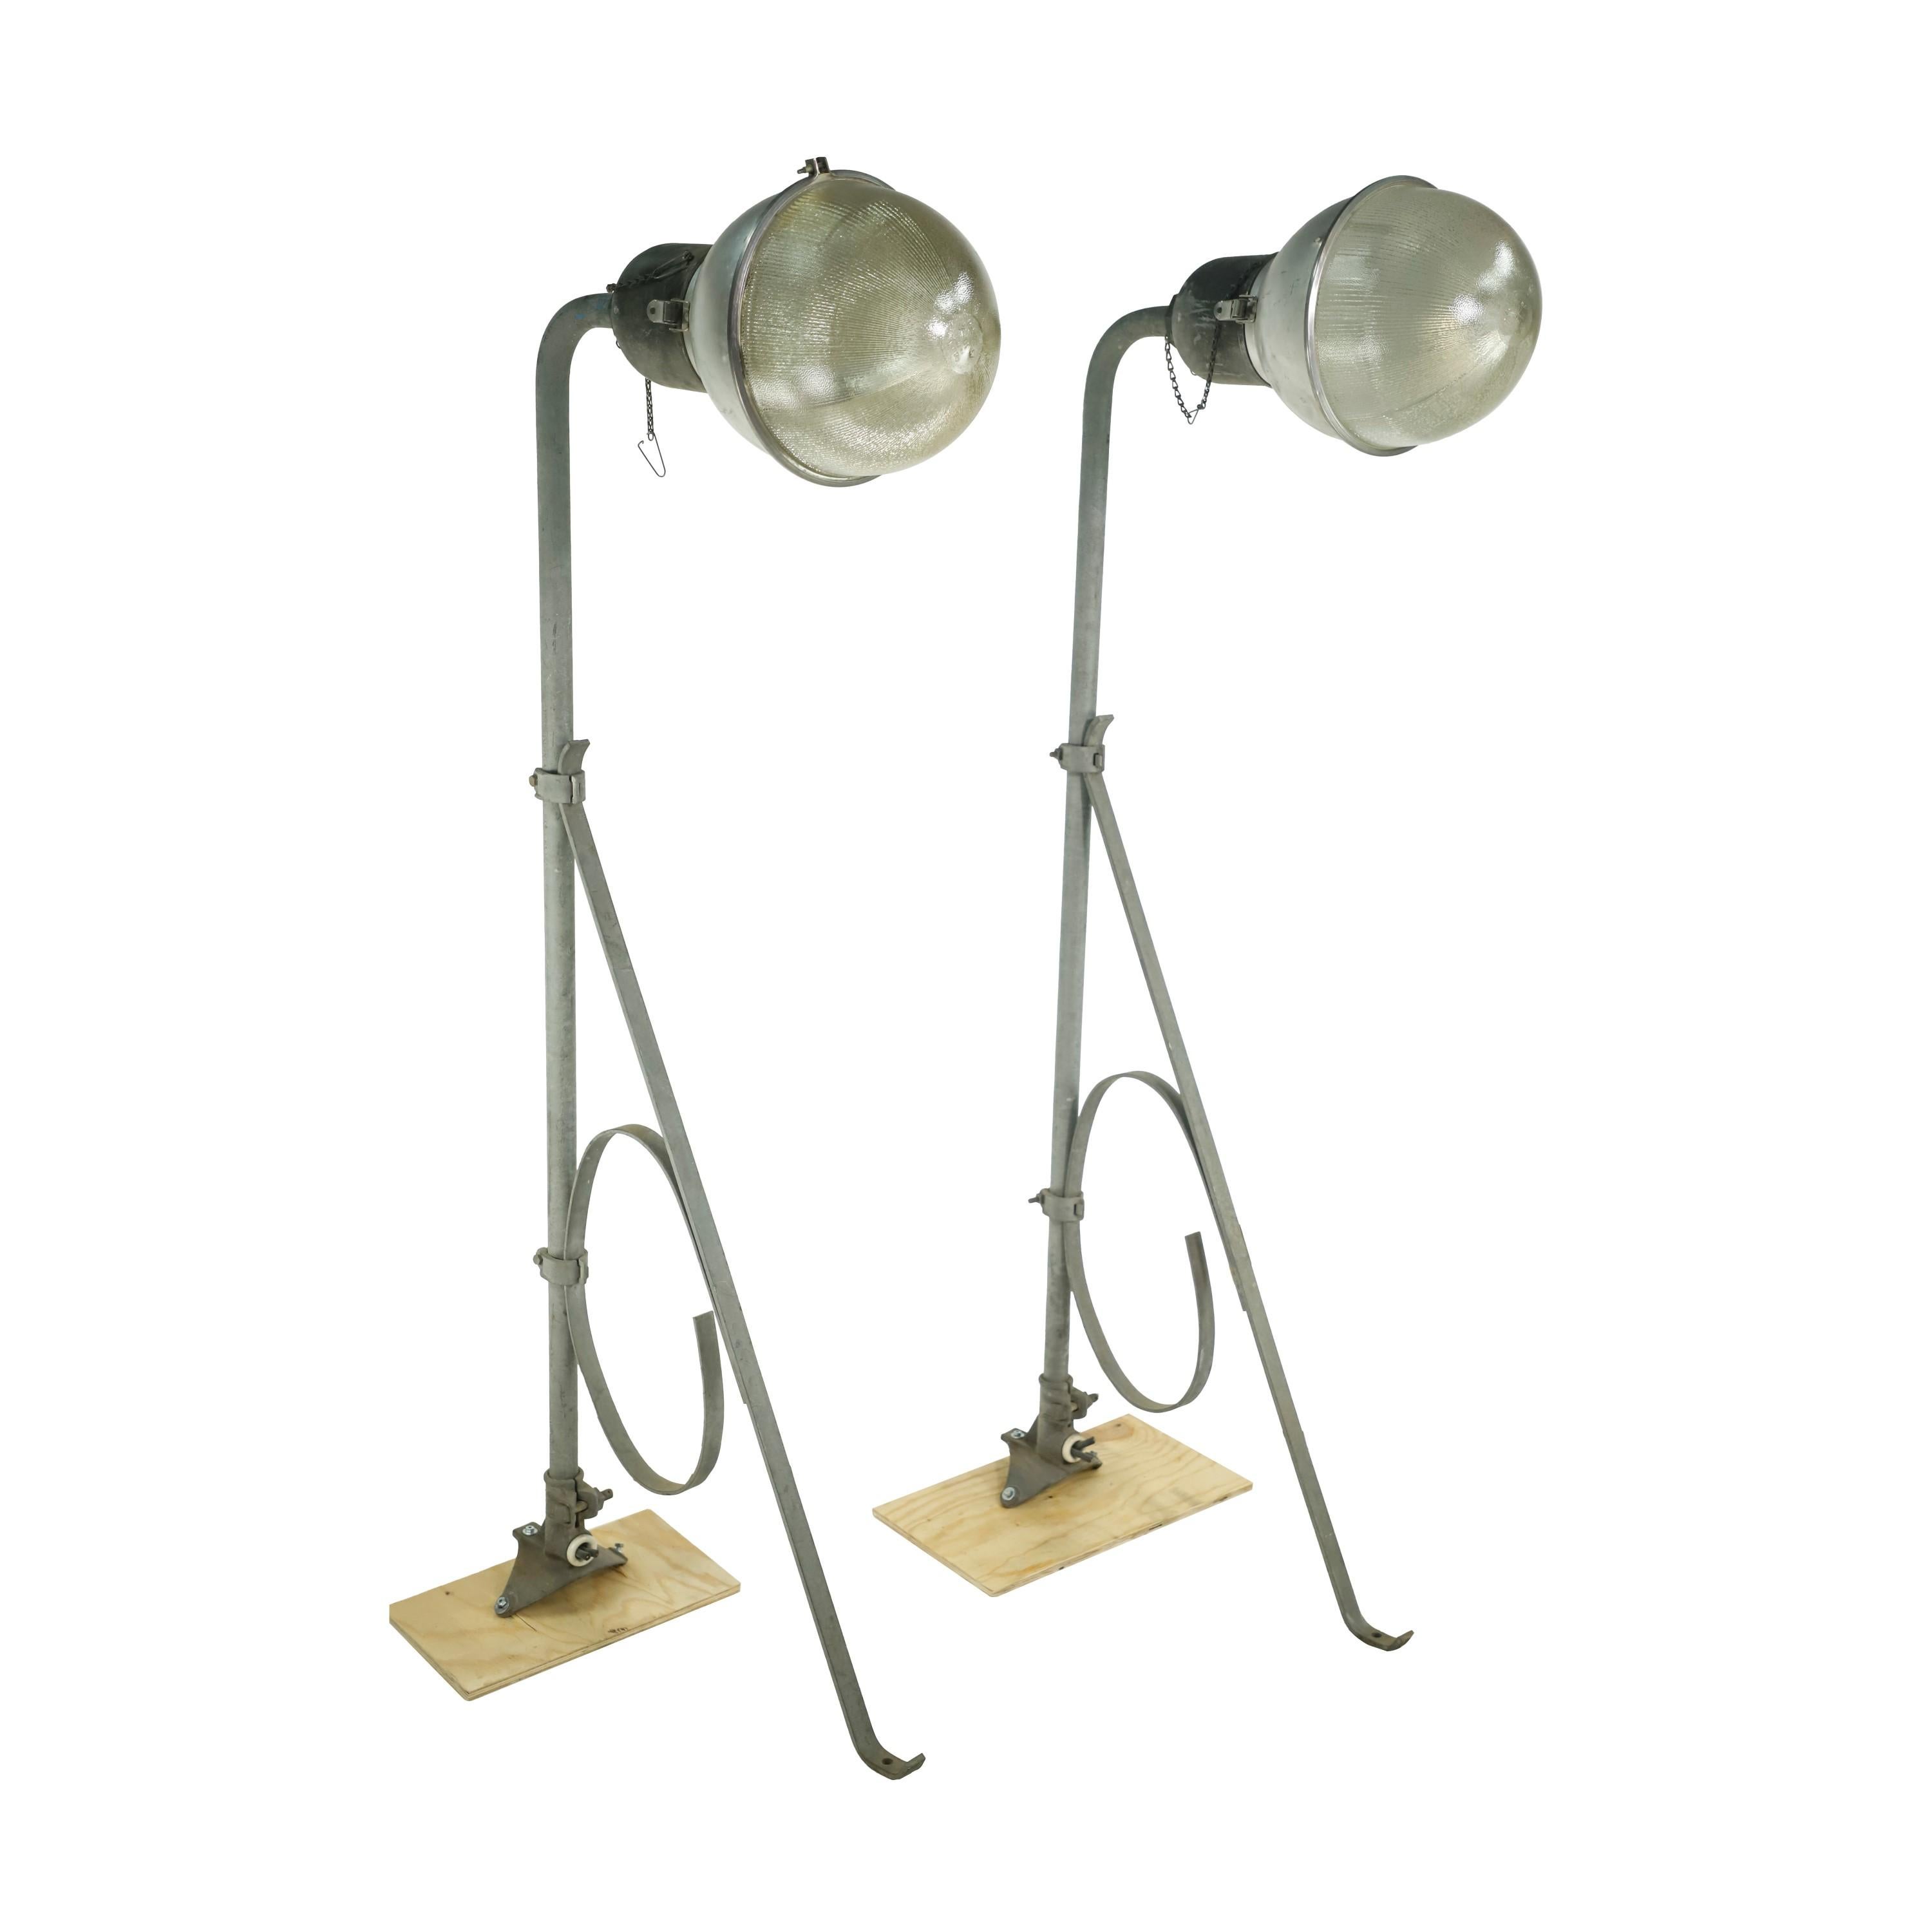 Large outdoor industrial style street lamps with prismatic glass shades. Cleaned and restored. upon purchase. Priced as a pair. Please note, this item is located in our Scranton, PA location.